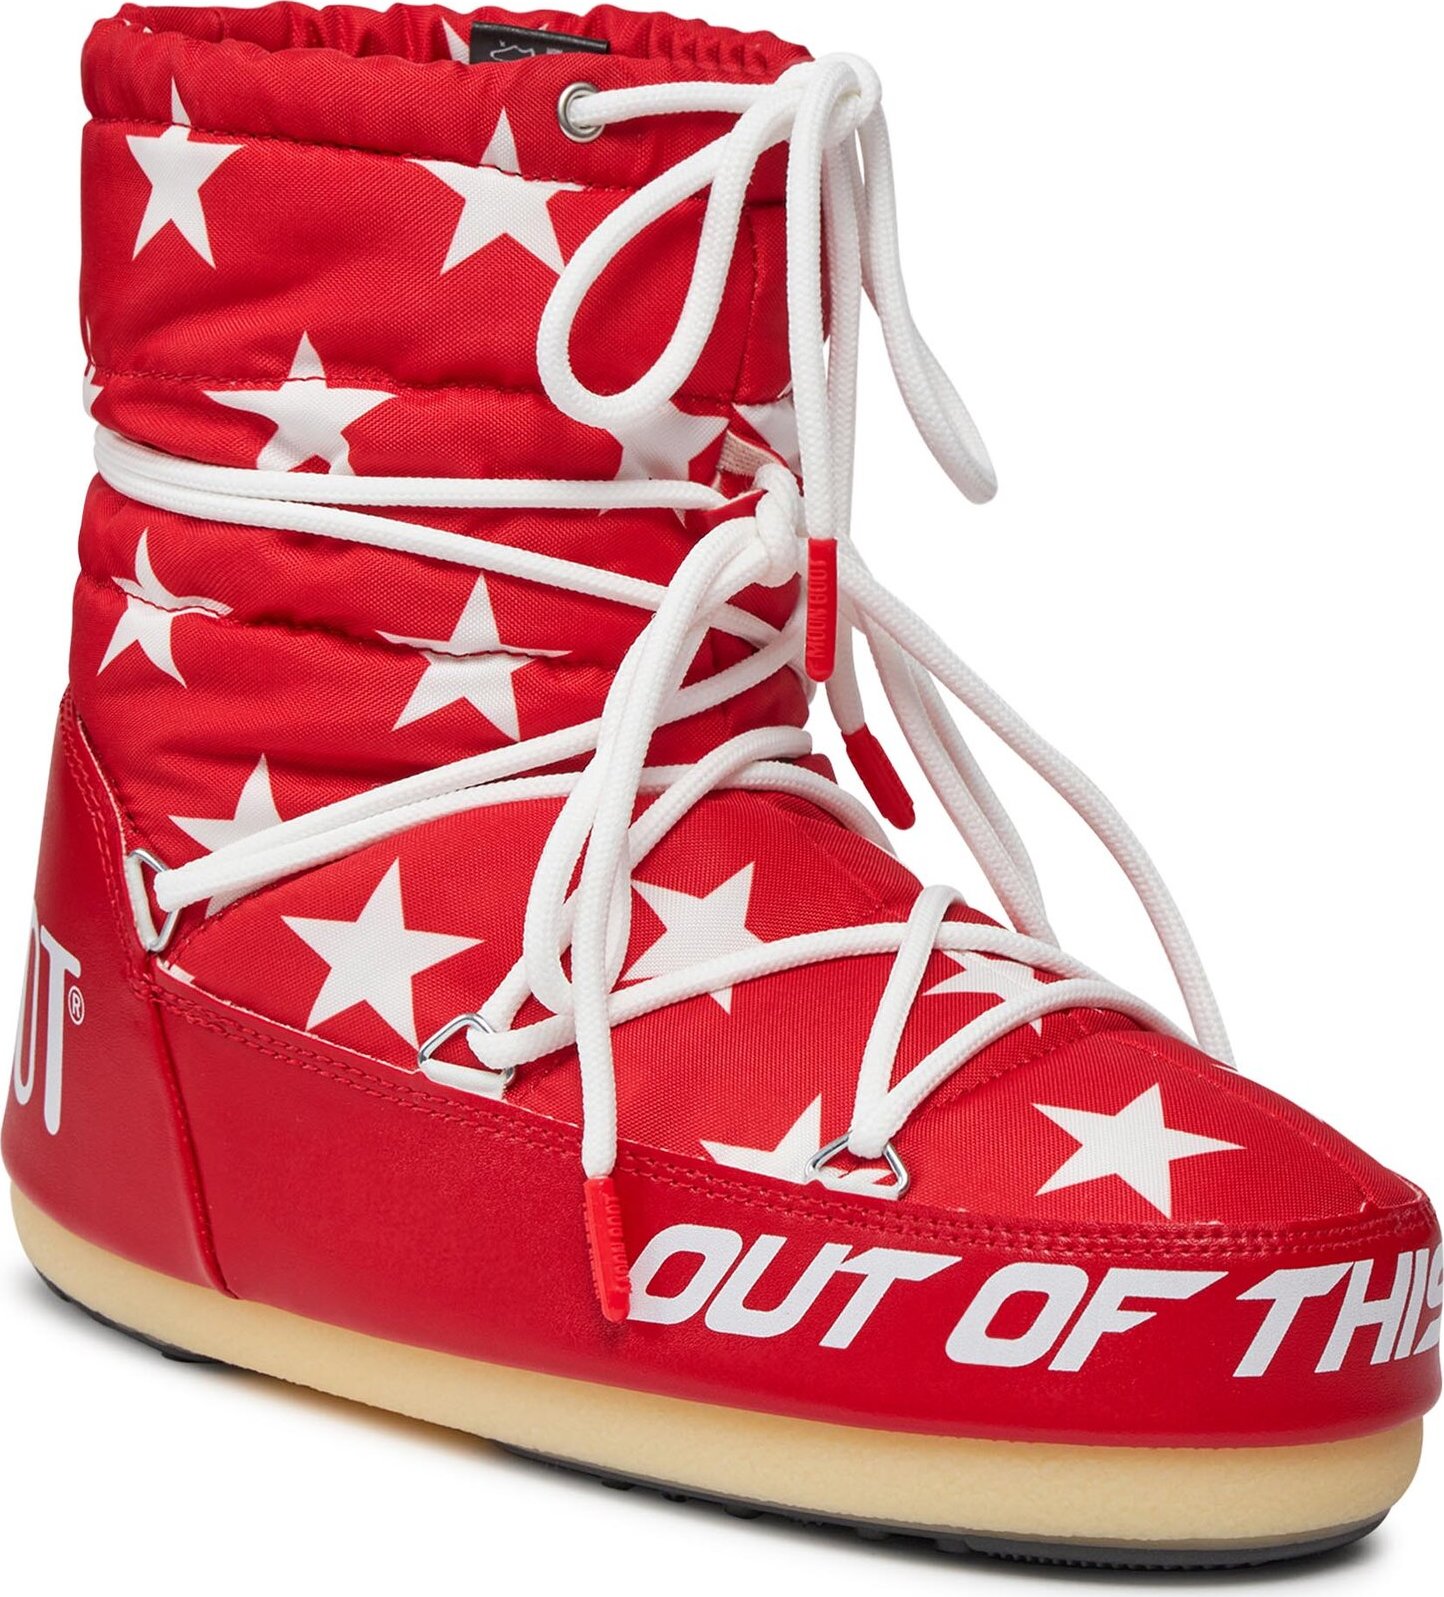 Sněhule Moon Boot Light Low Stars 14601700002 Red / White 002